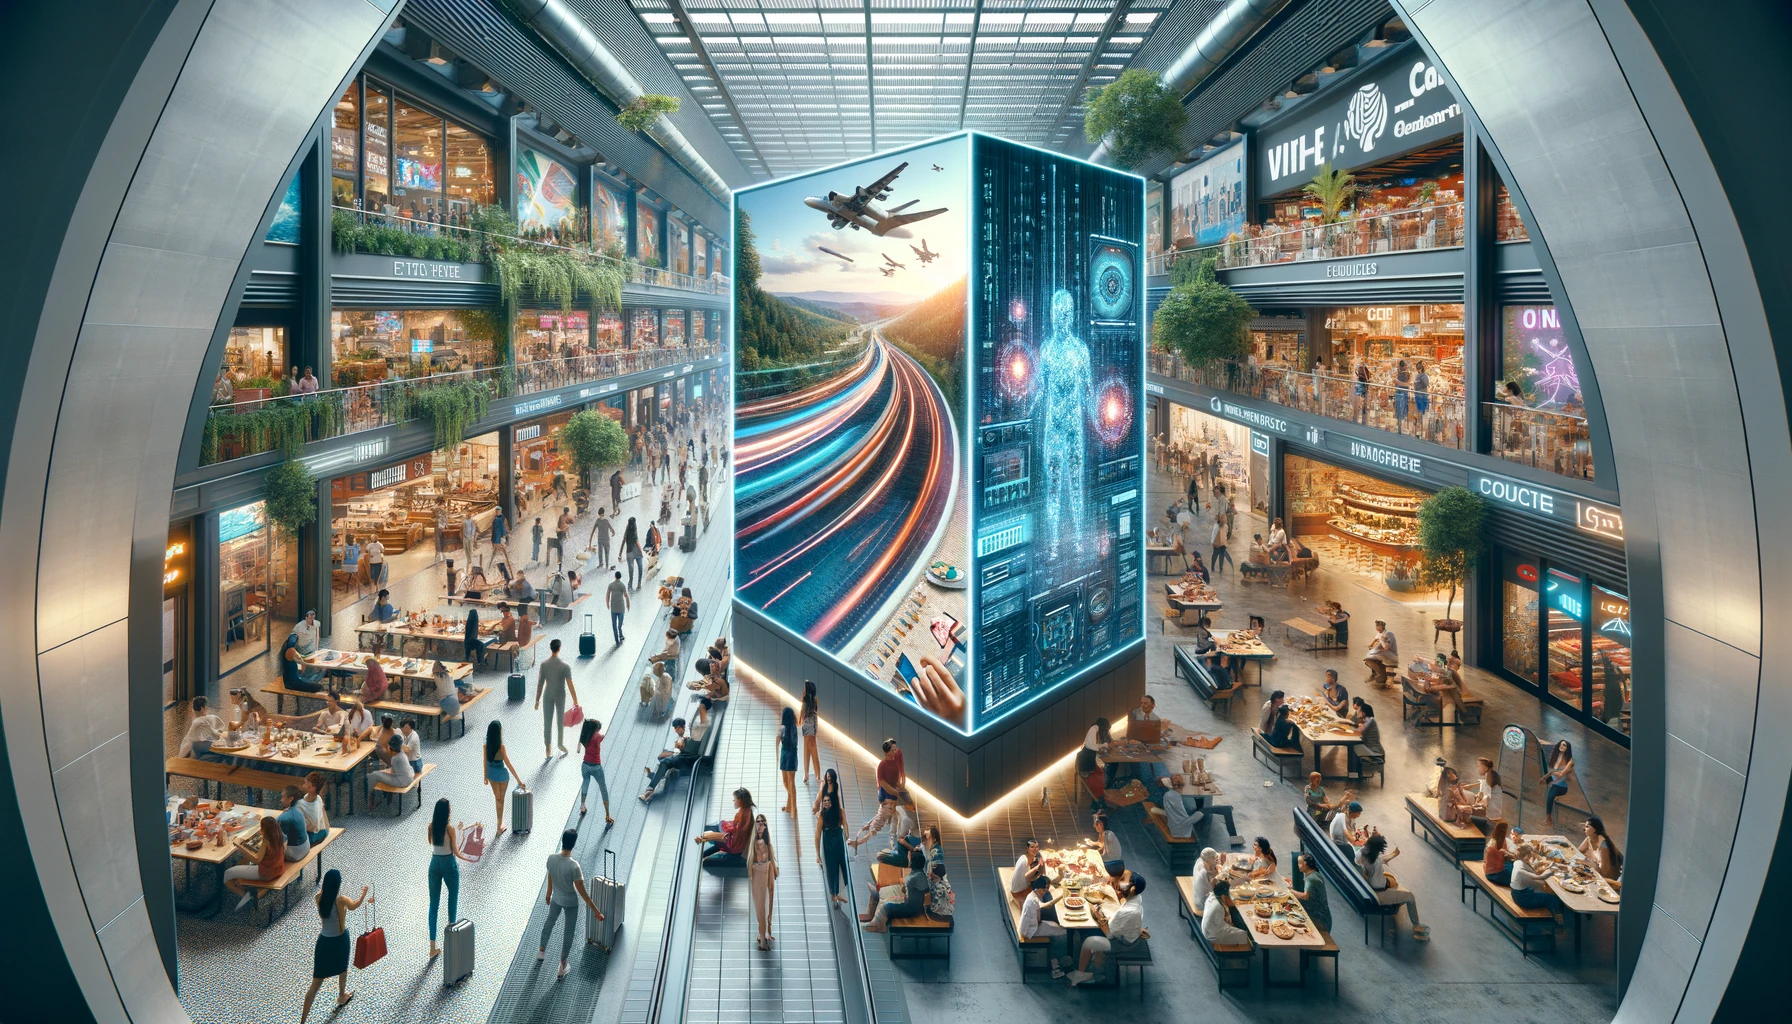 A futuristic commercial environment with AI elements and a split-screen showing a person captivated by a high-quality CETV ad on a digital billboard, highlighting emotional impact.